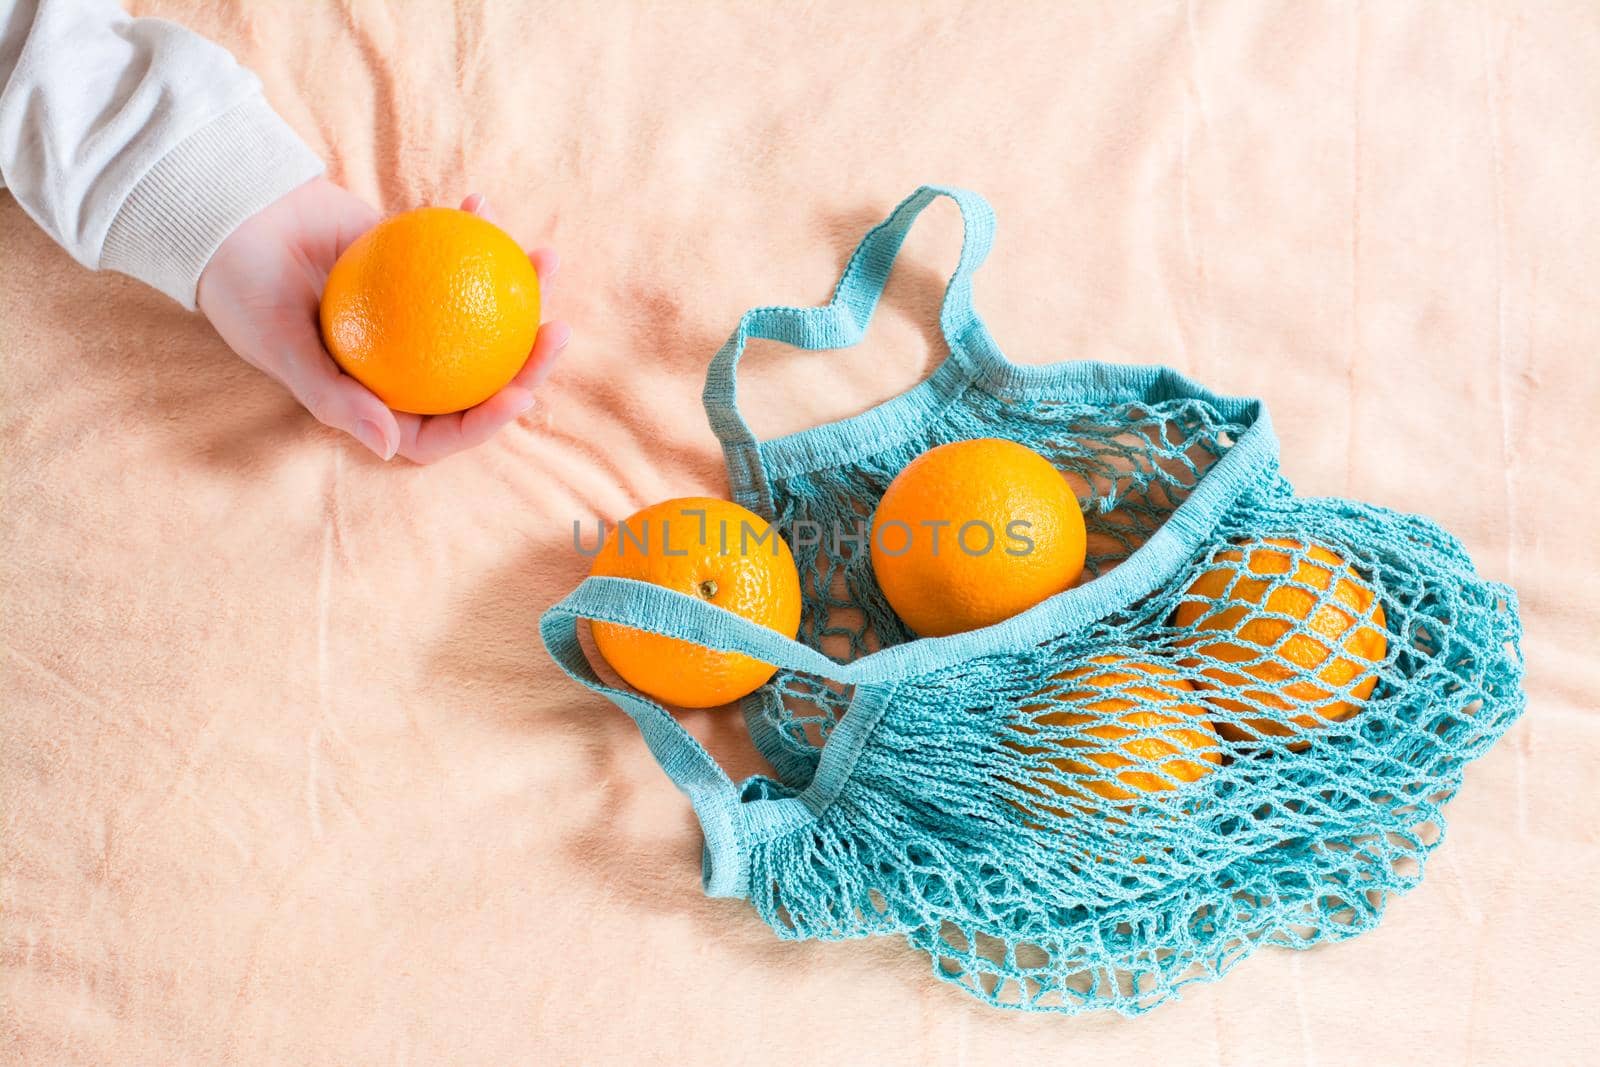 A female hand pulls out fresh oranges from a mesh bag on a fabric background. Zero waste by Aleruana